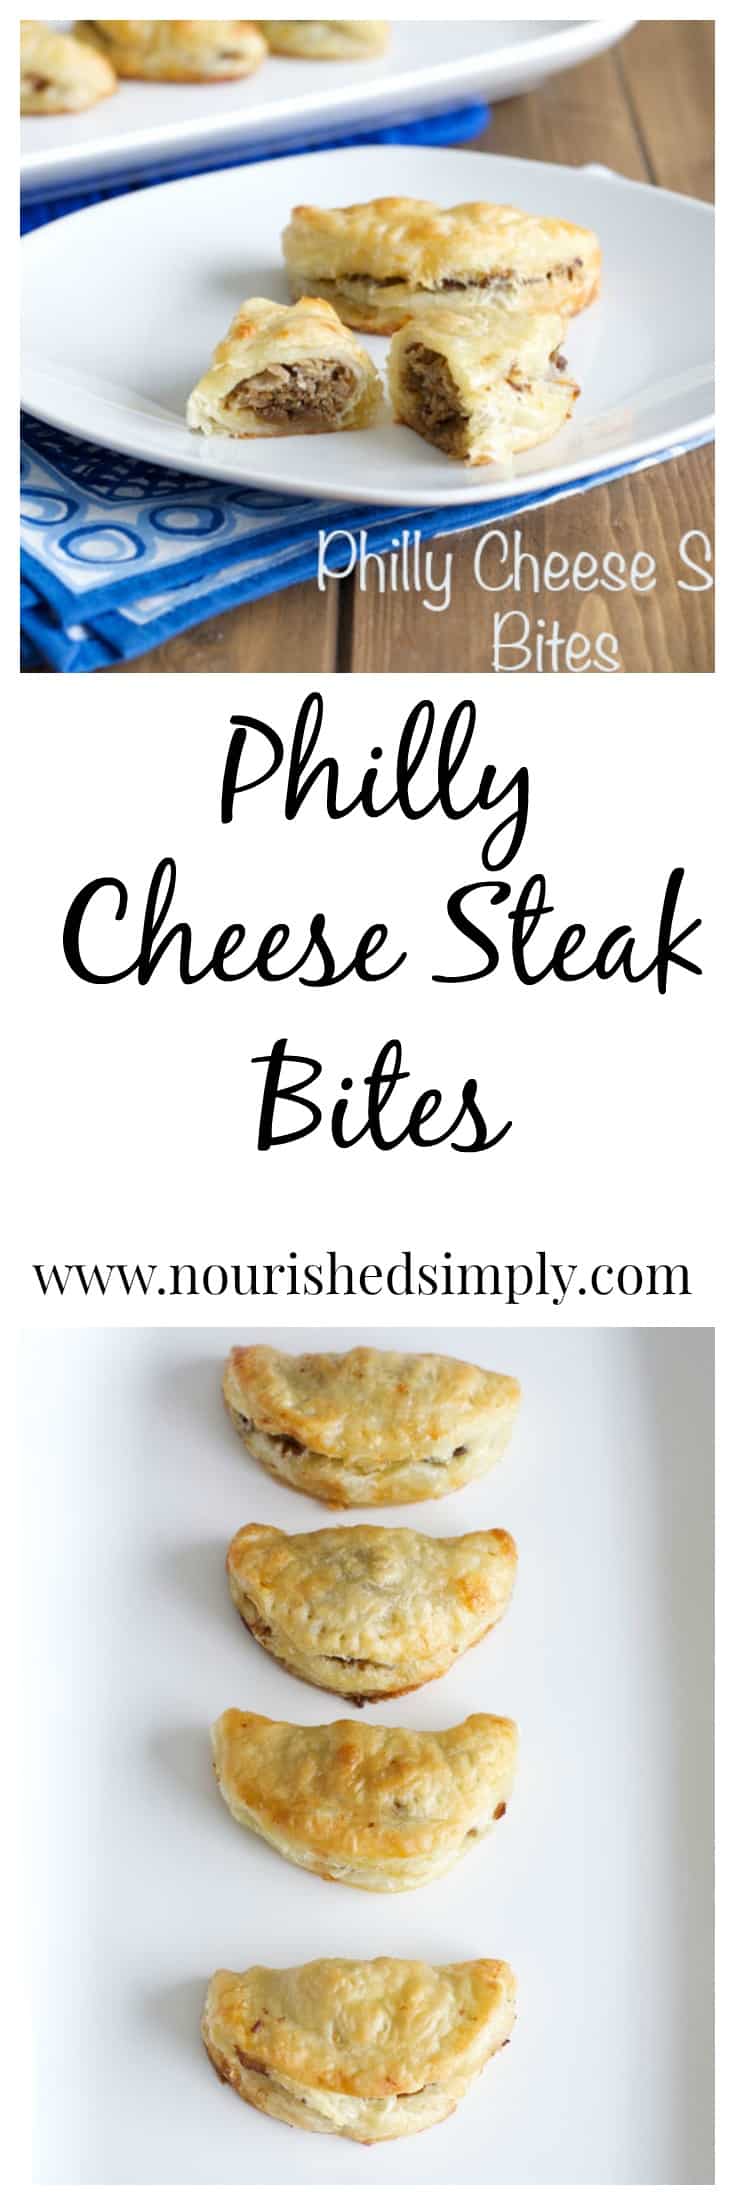 Philly Cheese Steak Bites - enjoy the deliciousness of the classic Philadelphia Cheese Steak in a lower calorie bite size treat.